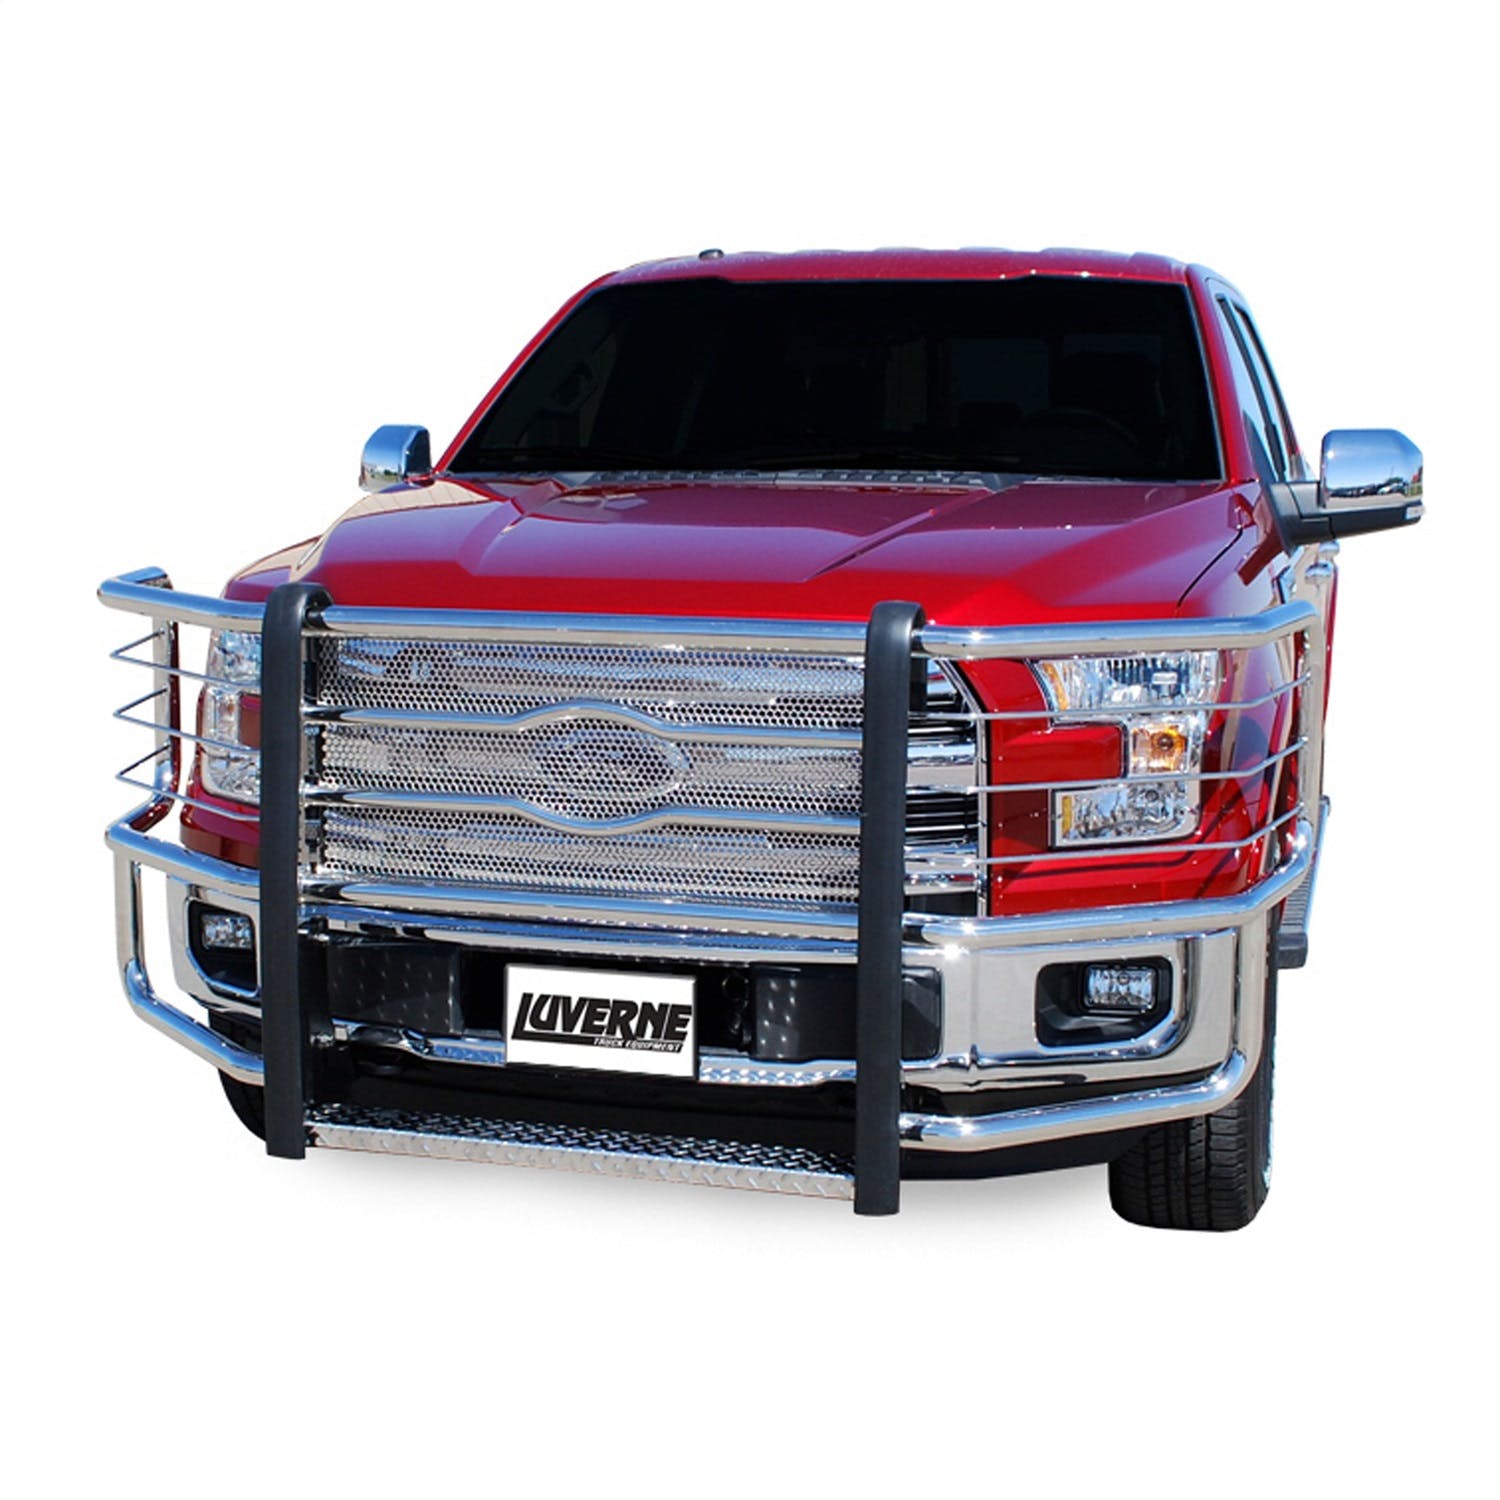 LUVERNE 311523 Prowler Max Grille Guard